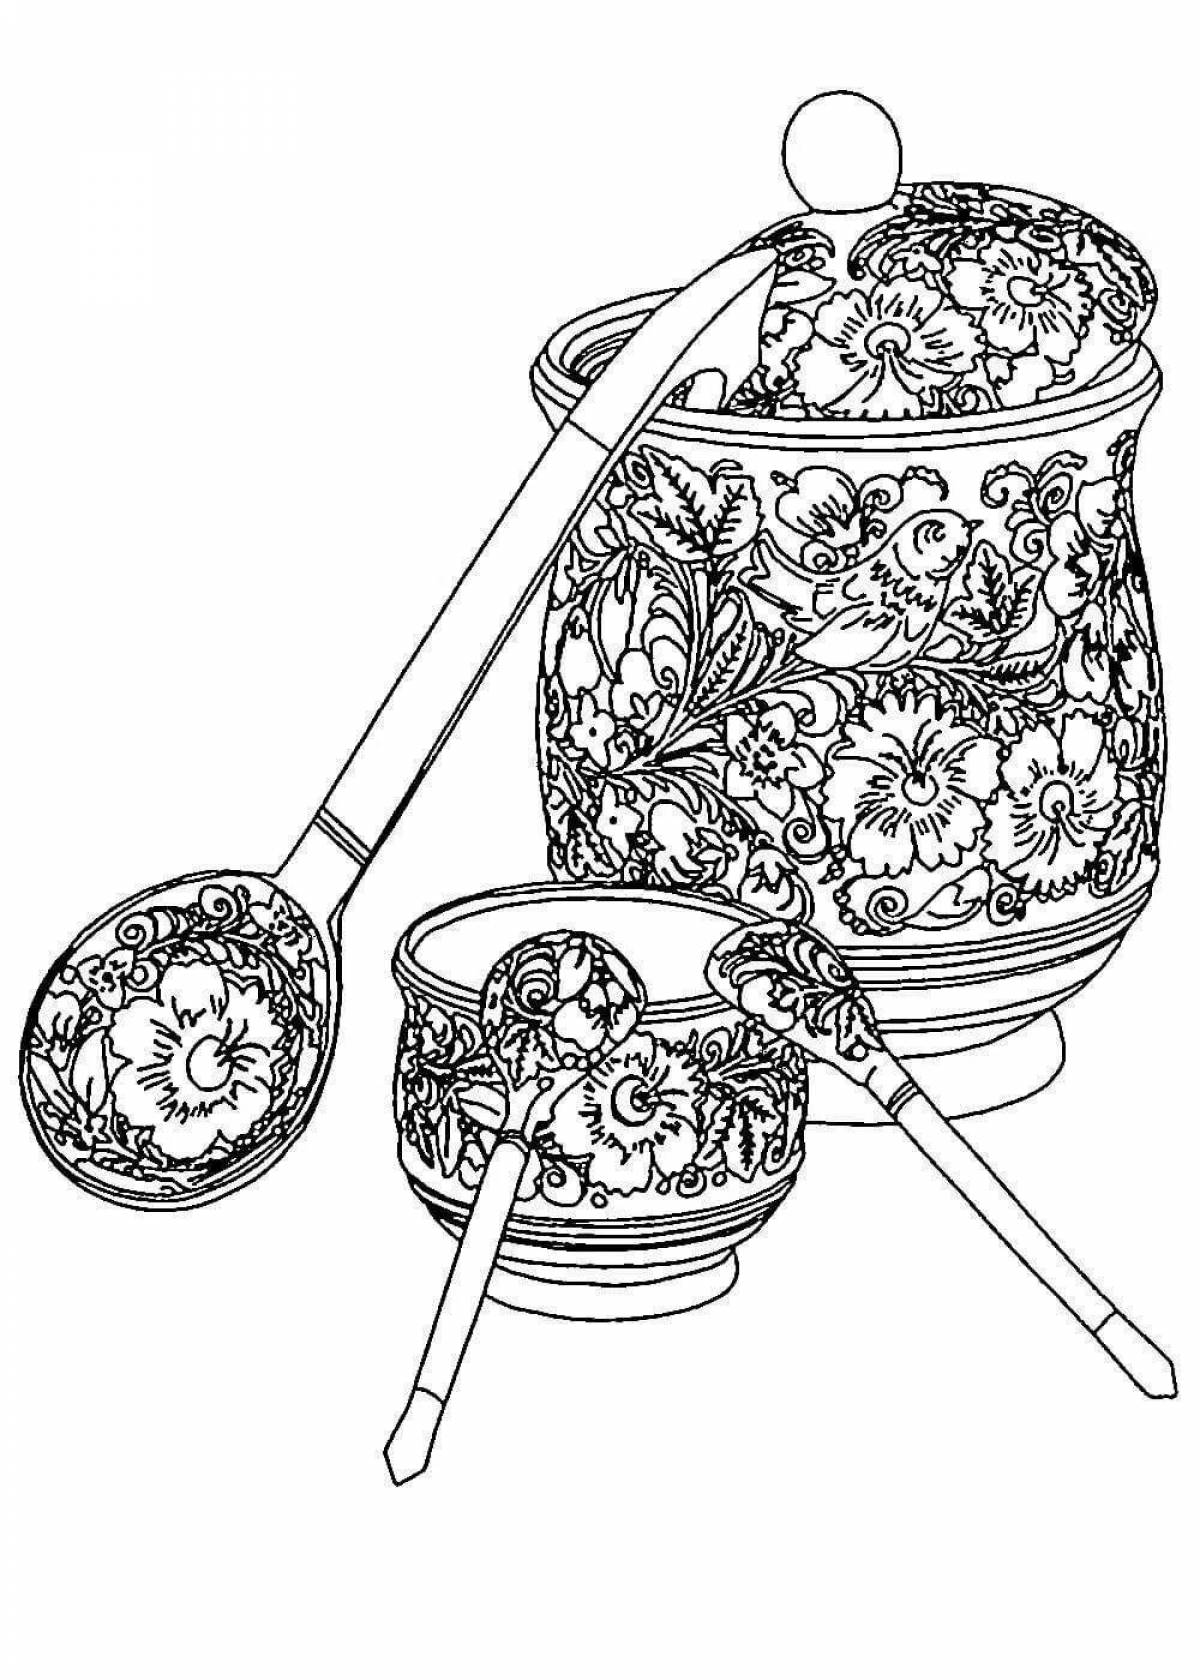 Coloring book glamor painted spoon